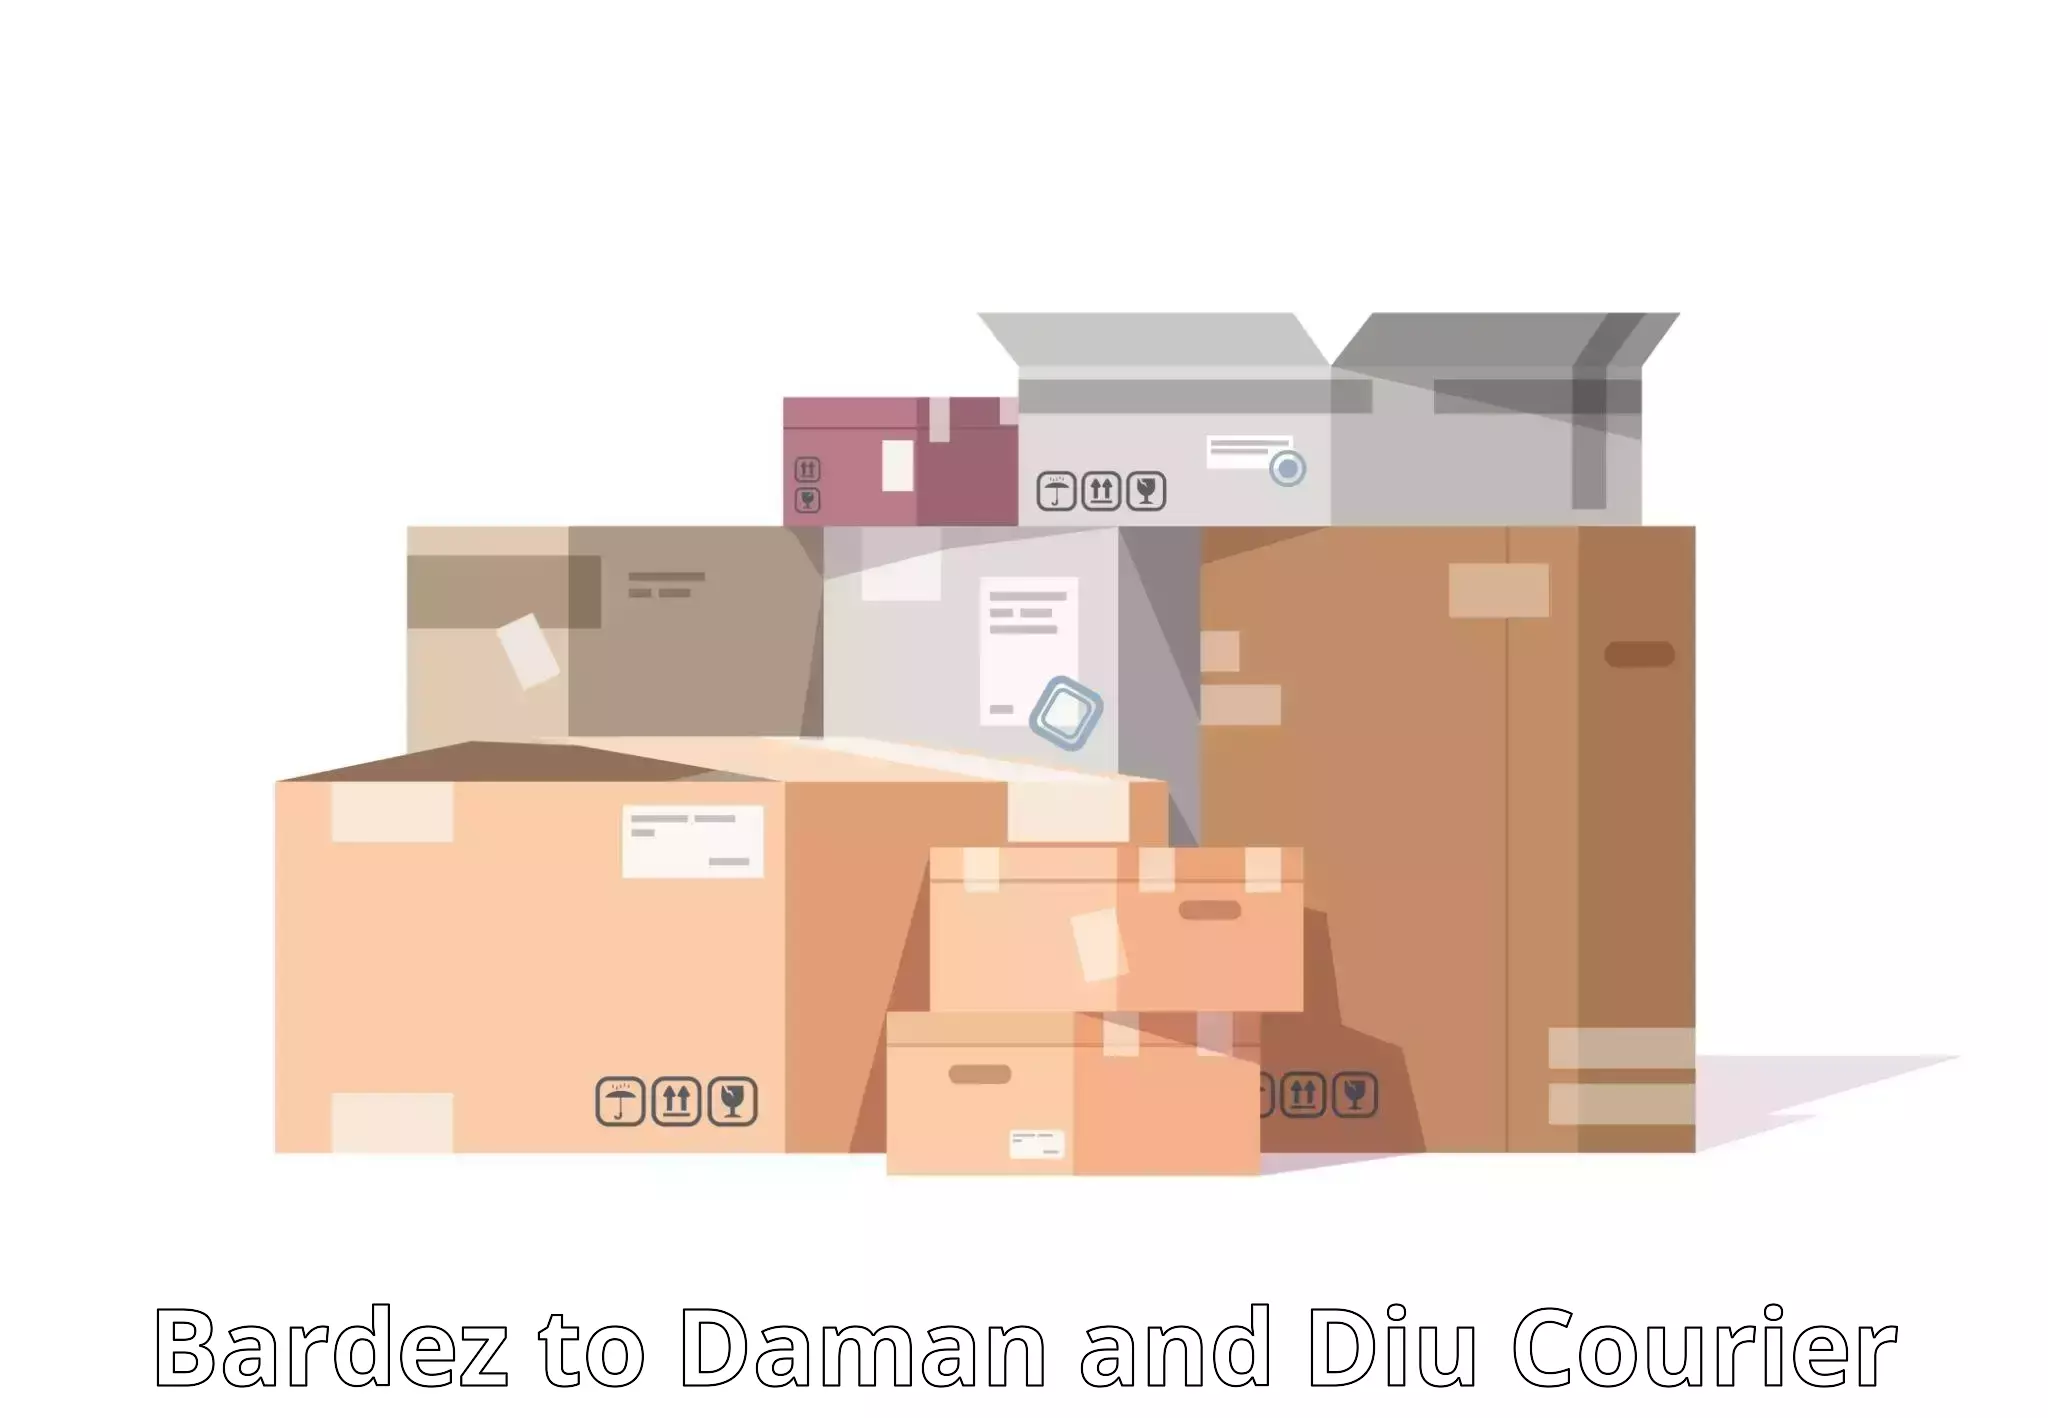 End-to-end delivery Bardez to Daman and Diu